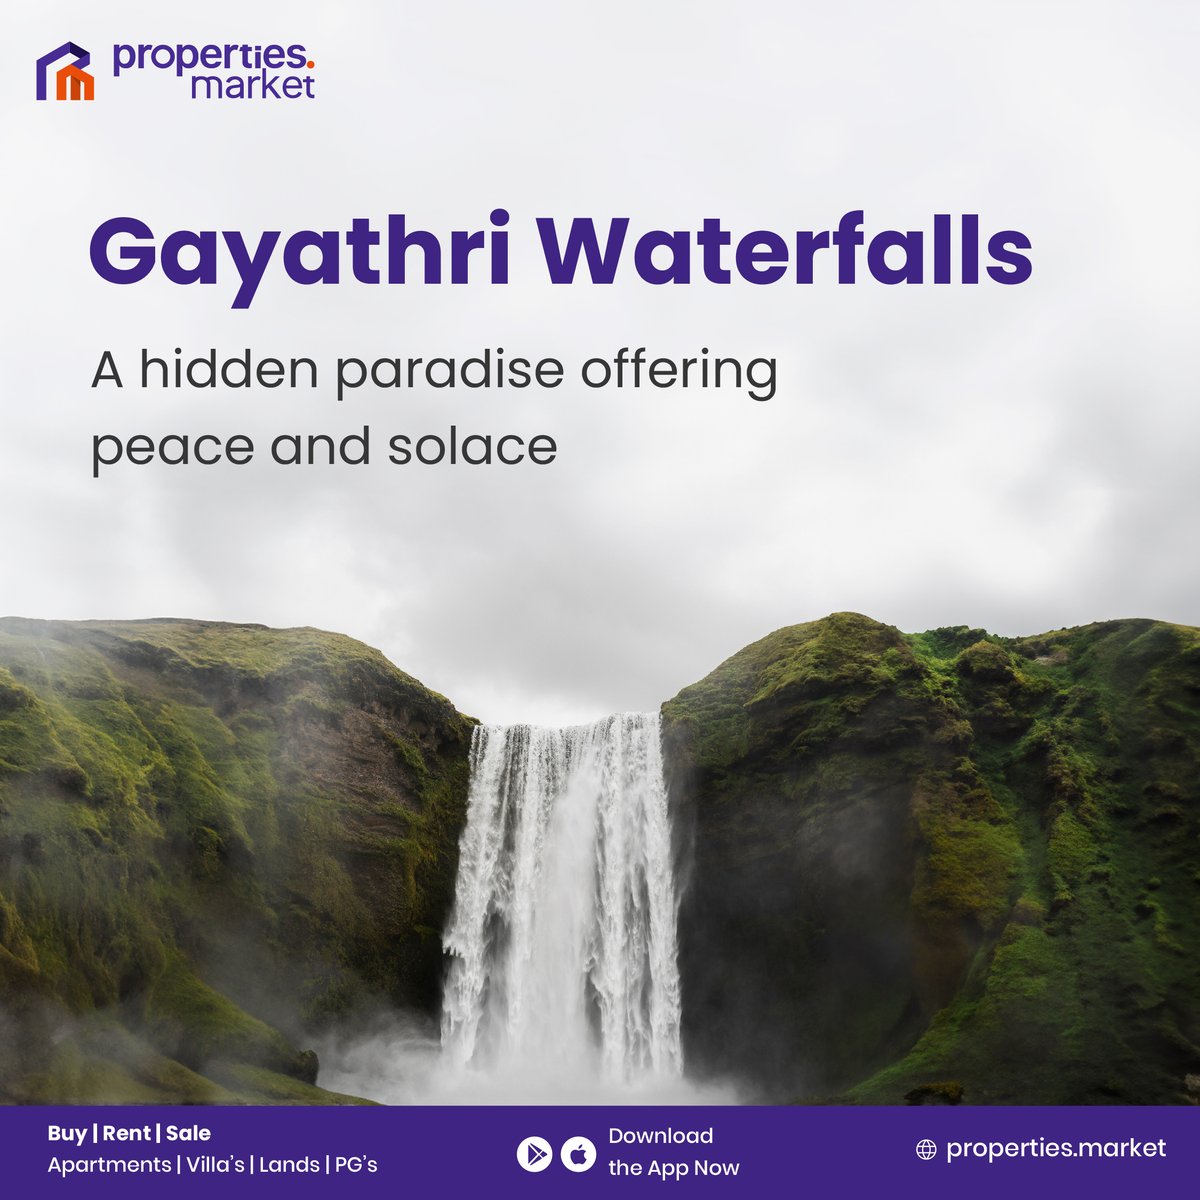 Lose yourself in the beauty ✨ of Gayatri Waterfalls, where nature's serenity awaits to rejuvenate your soul.

Visit us: properties.market/in/home

#gayatriwaterfall #forestretreat #HyderabadEscape #treasuretrove #realestate #propertywonders #findyourdreamhome #propertiesmarketin